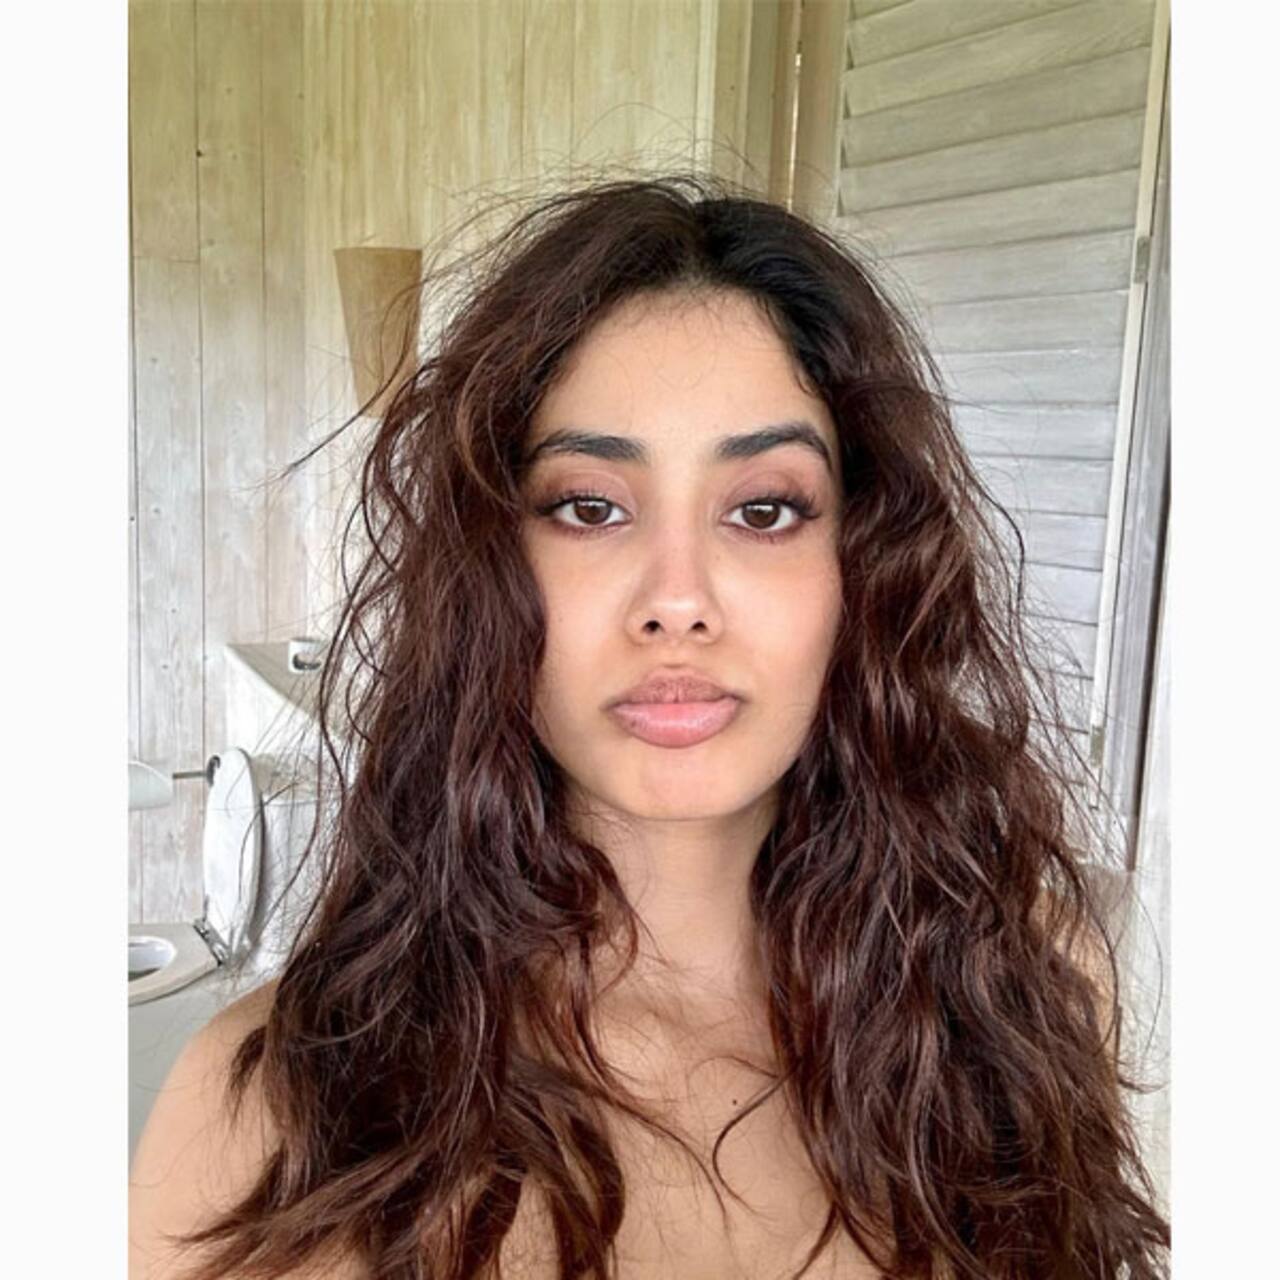 After Shruti Haasan, Janhvi Kapoor shares messy hair, no makeup look  pictures as she vacations in Maldives